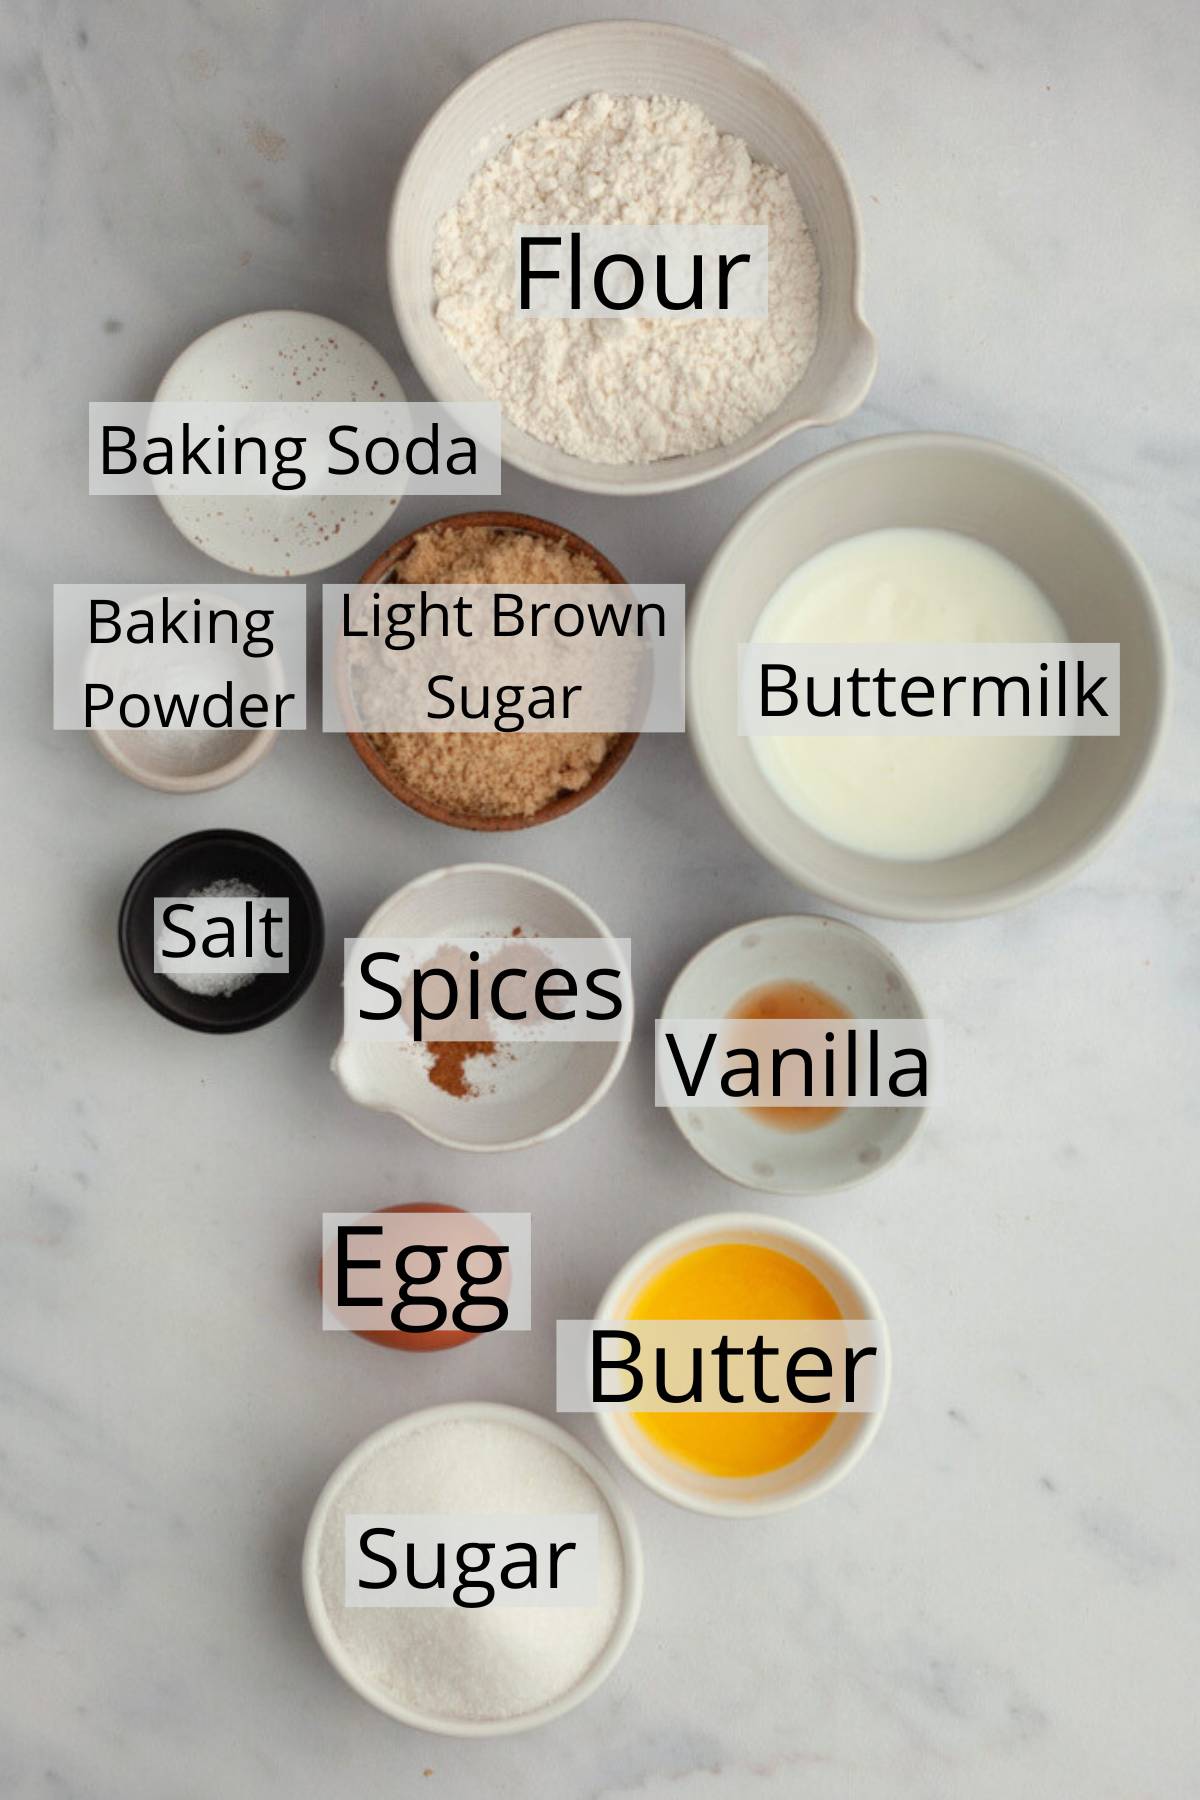 All the ingredients needed to make cinnamon donuts, weighed out into small bowls.